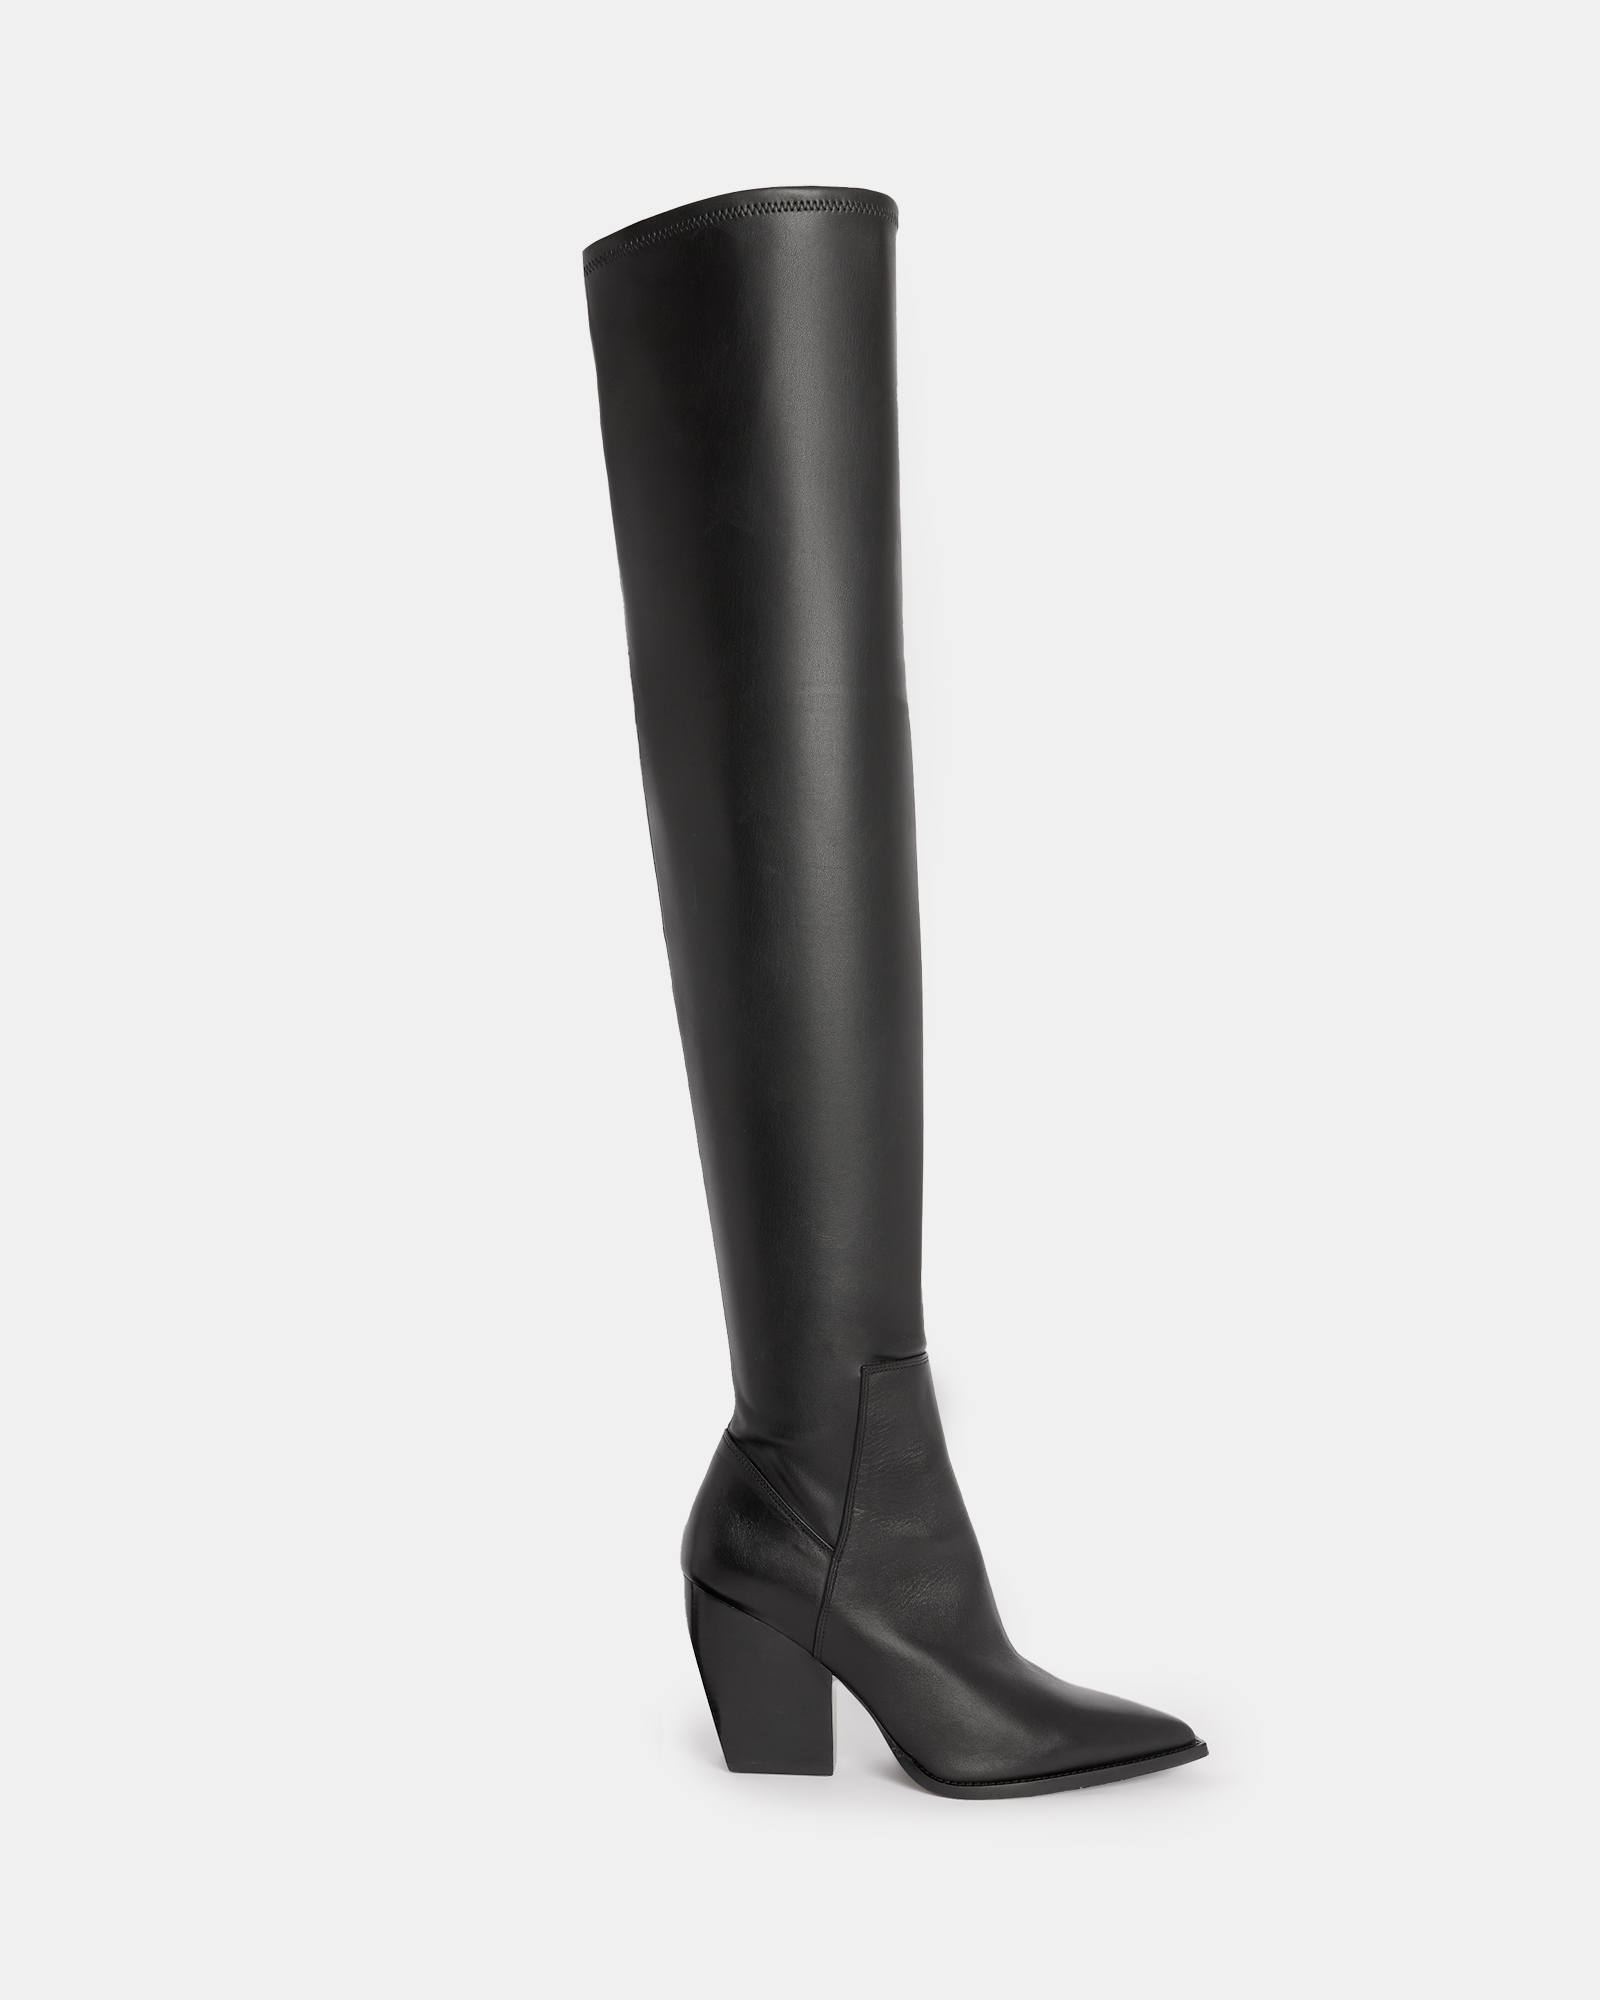 AllSaints Lara Over The Knee Pointed Boots